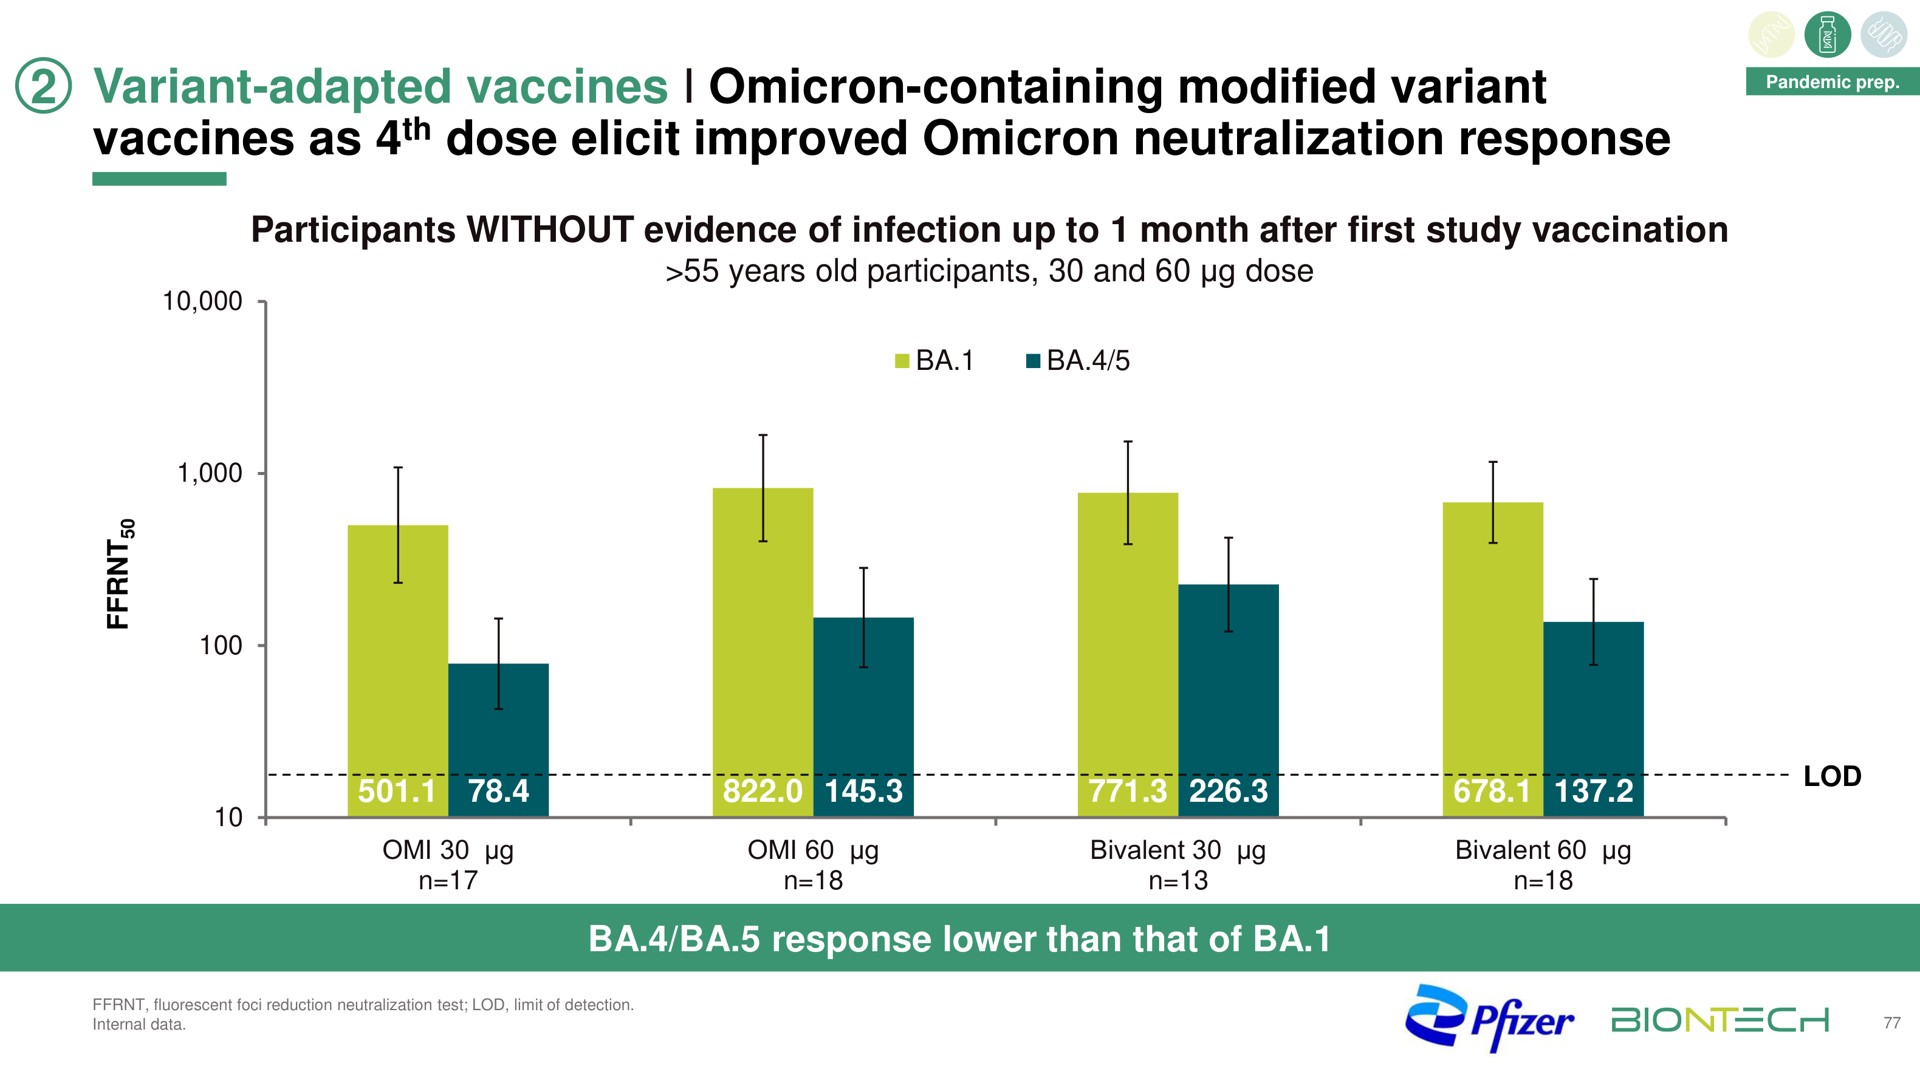 variant adapted vaccines omicron containing modified variant vaccines as dose elicit improved omicron neutralization response | BioNTech